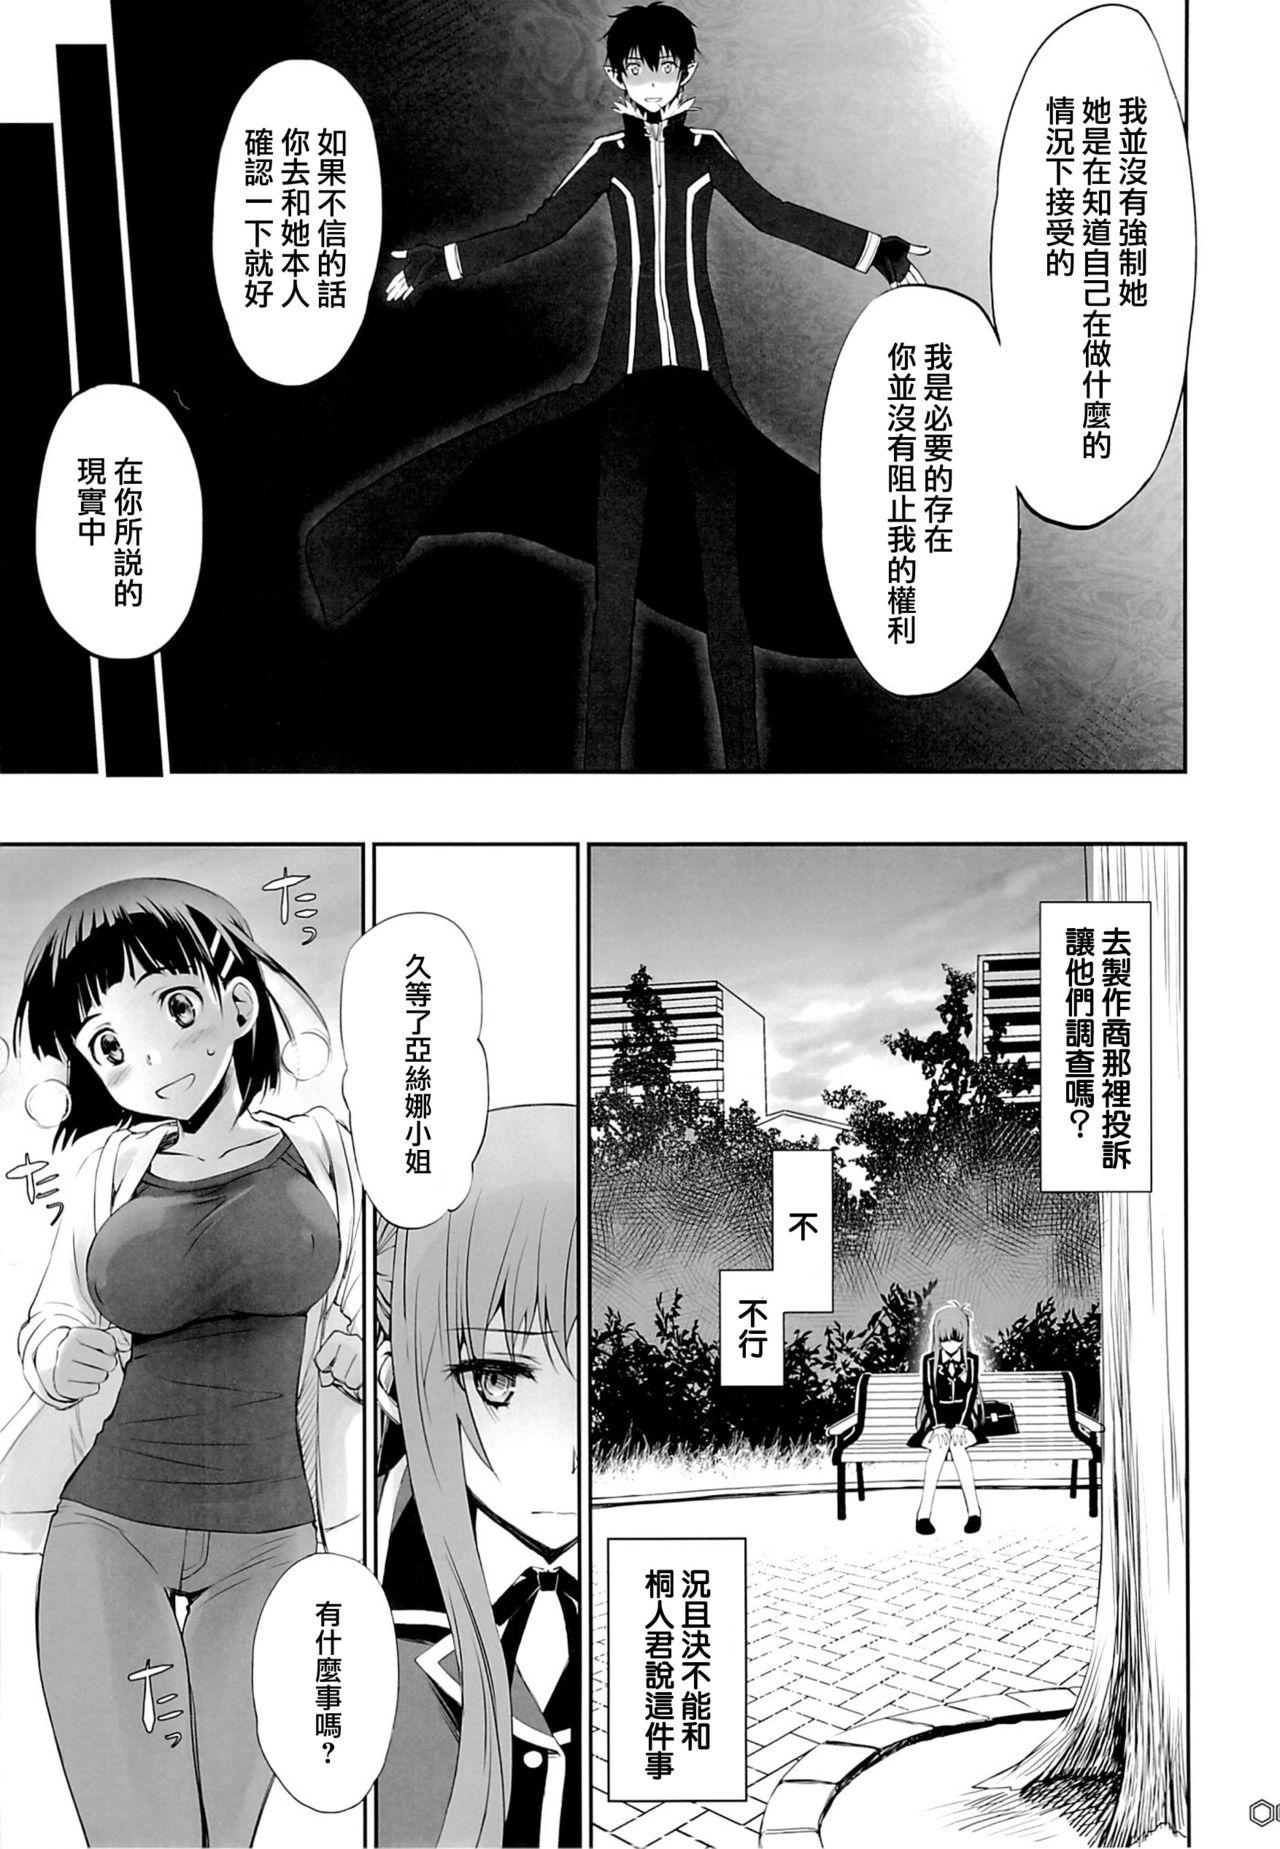 Amatoriale turnover - Sword art online Strapon - Page 4